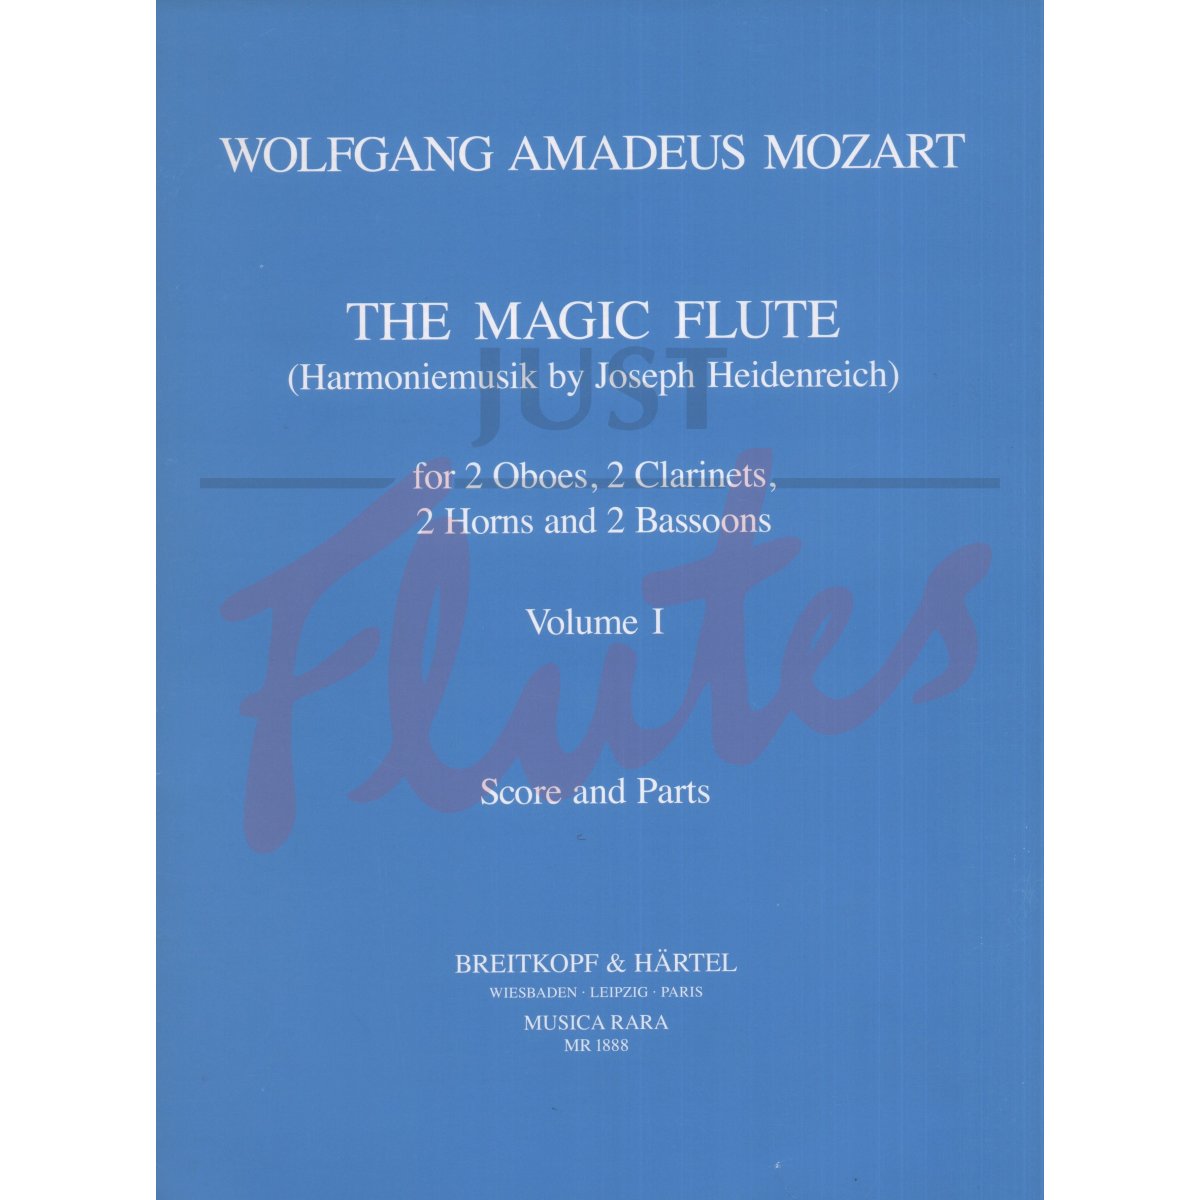 The Magic Flute Vol.1 for Two Oboes, Two Clarinets, Two Horns and Two Bassoons